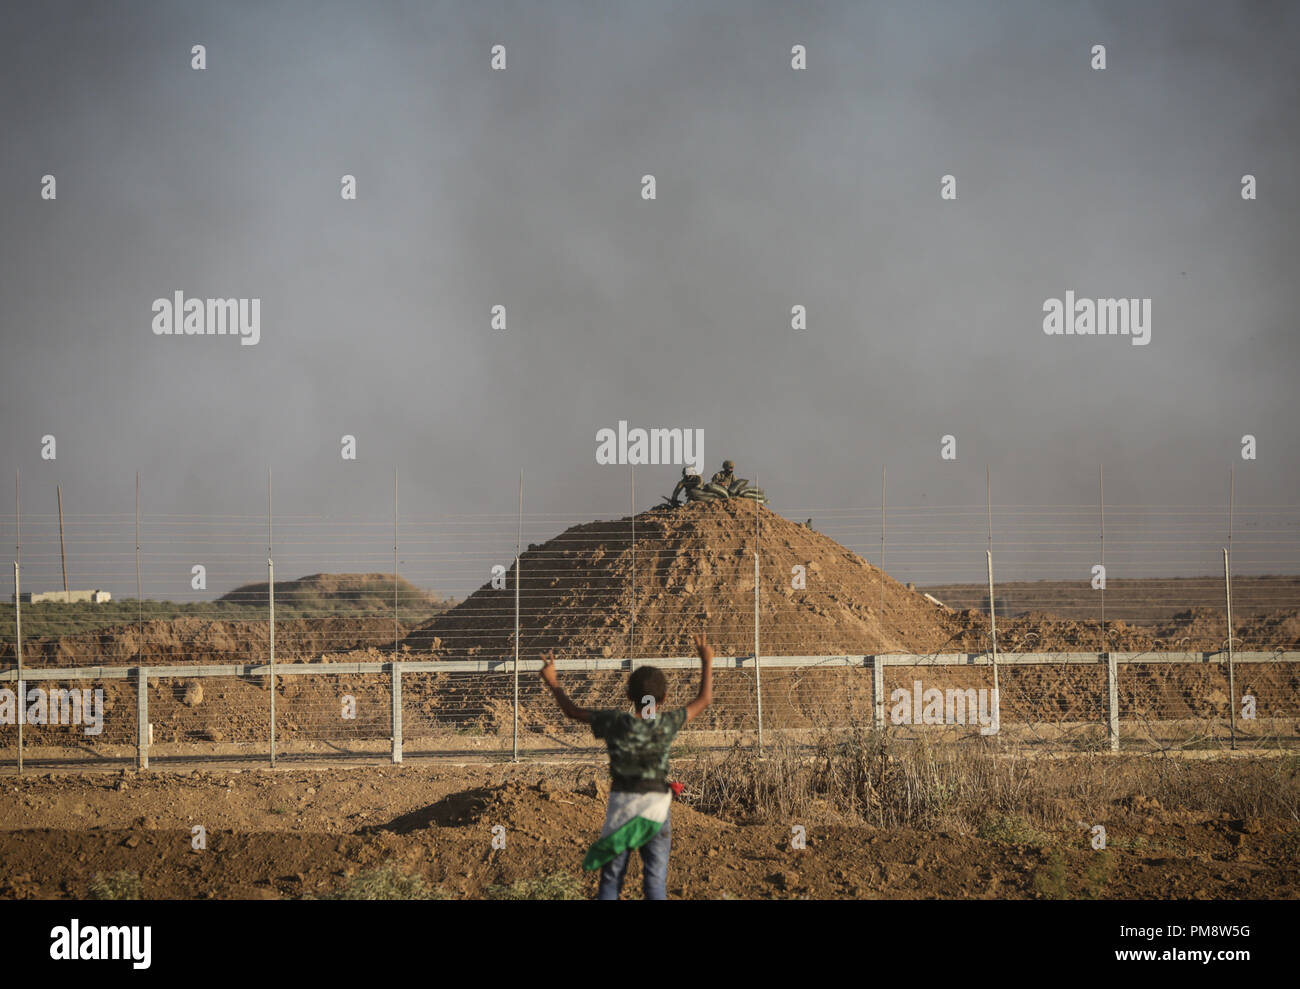 Palestinian protesters seen standing next to the Israeli fence during clashes. Clashes between Palestinian protesters and the Israeli forces during a protest along the Israeli fence East of Gaza City. Stock Photo